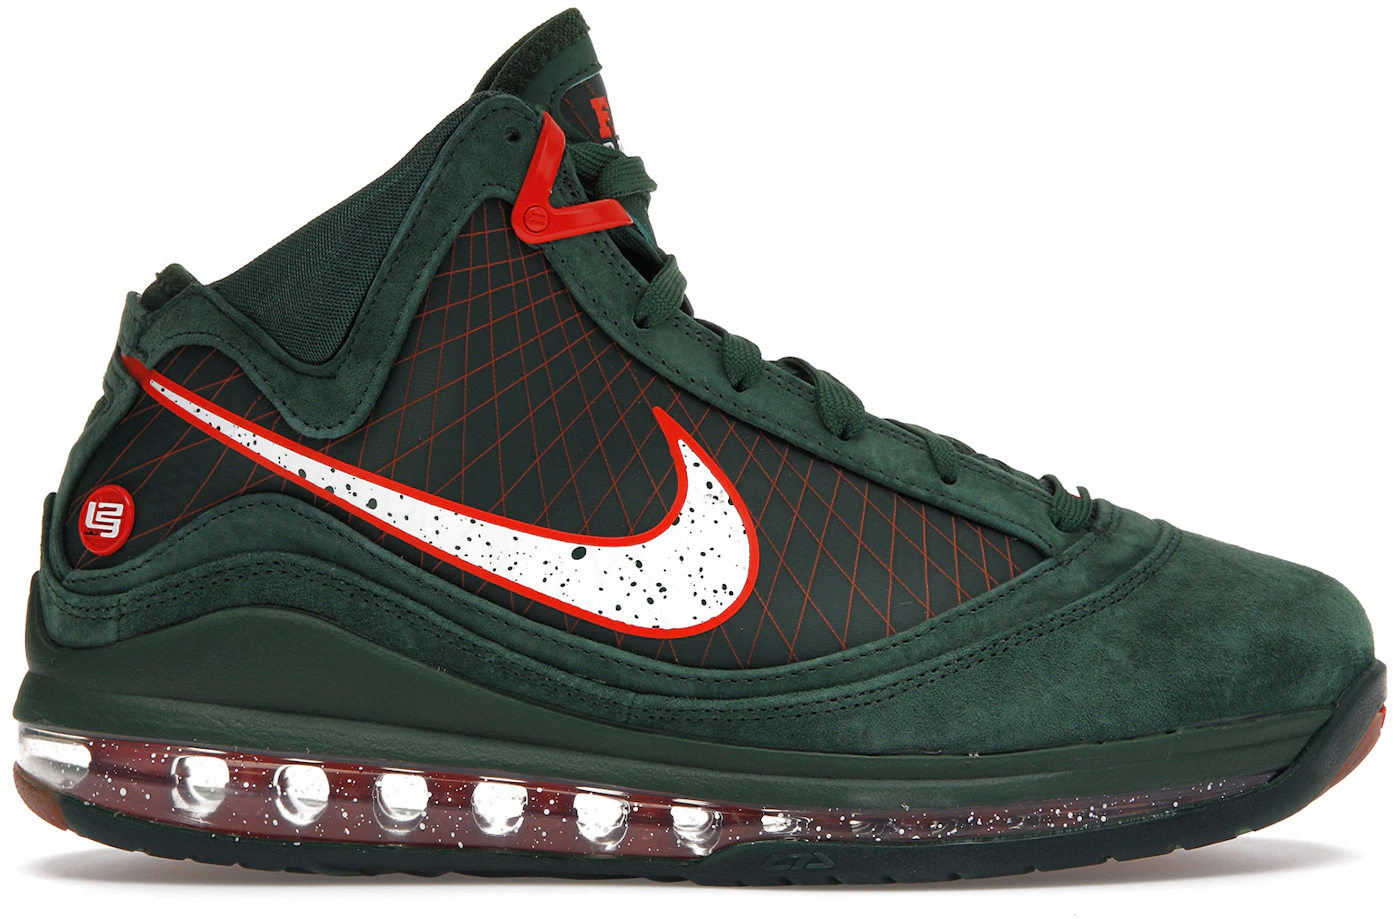 LOOK: LeBron James' Florida A&M sneakers and other NBA shoes of